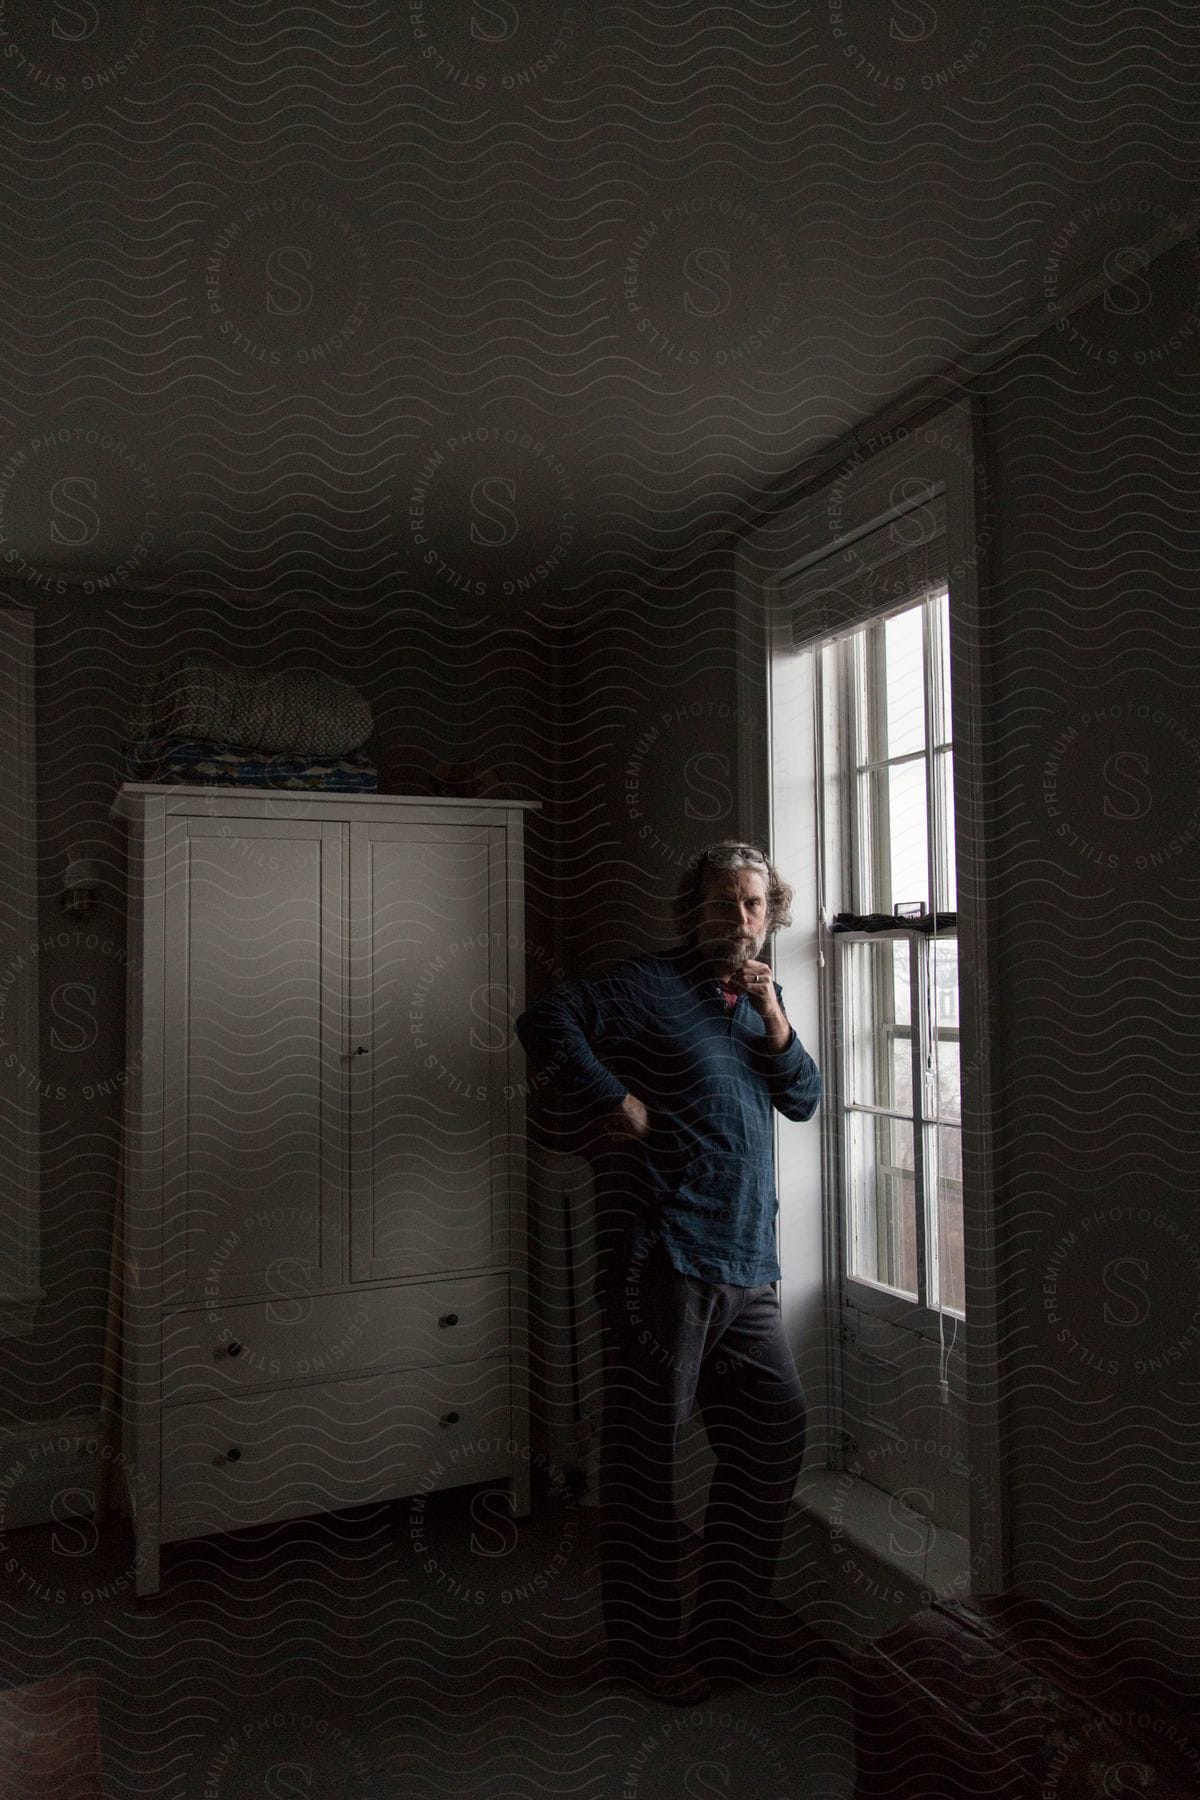 A man in his 50s standing in a dark bedroom next to a window with light coming in